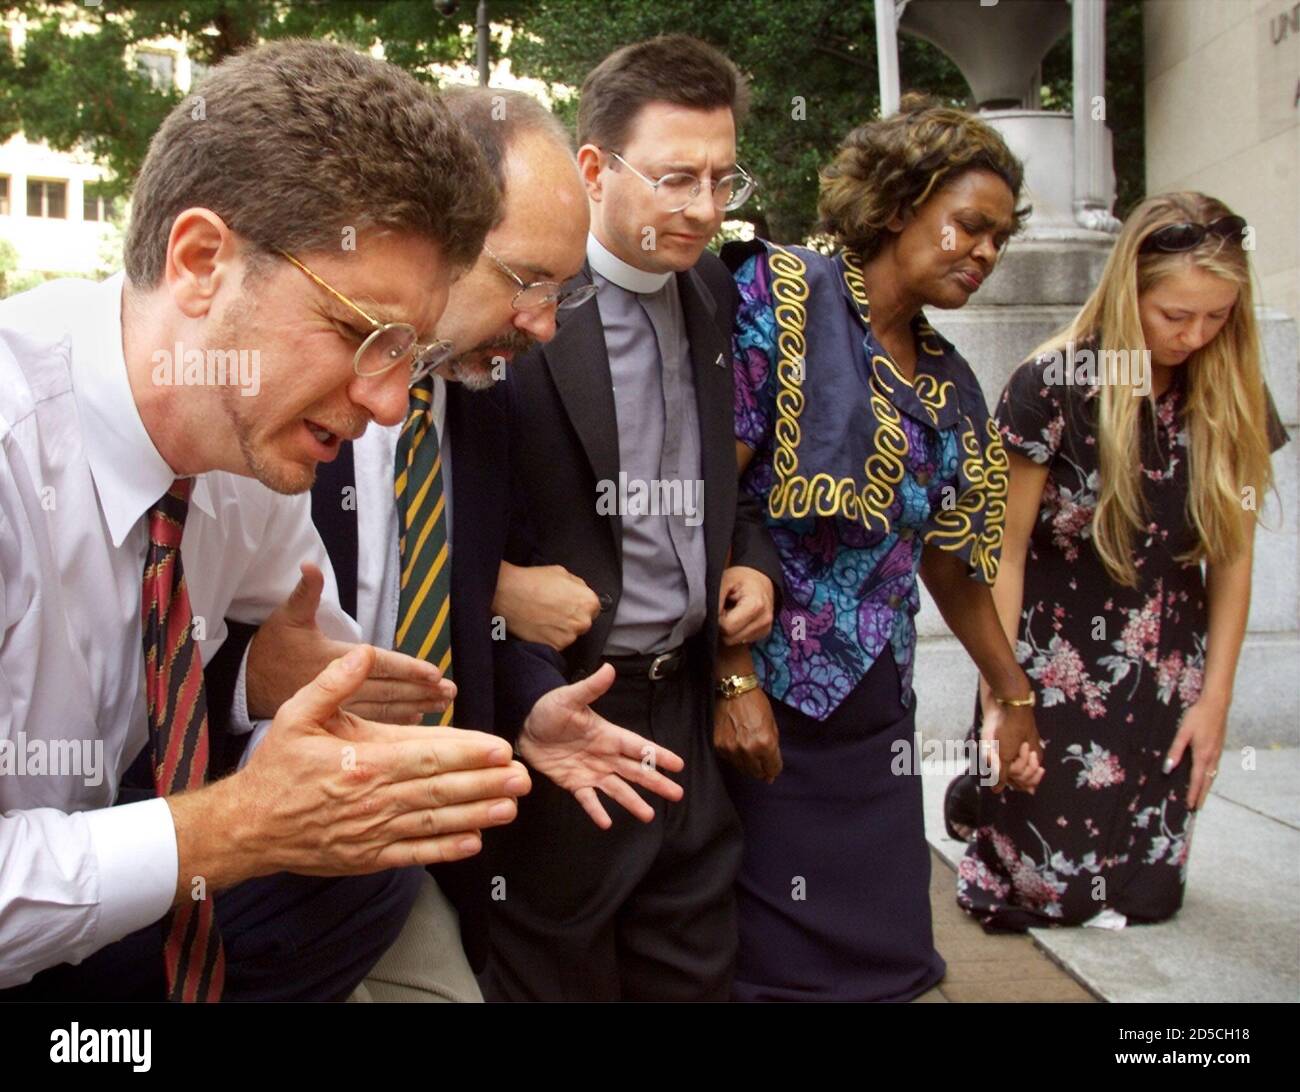 Members of the Christian Defense Coalition pray in front of the Justice Department in Washington, D.C. September 1. The group first held a press conference to call for an independent investigation of the of the Clinton administration's handling of the 1993 destruction of the Branch Davidian compound in Waco, Texas. From left to right are Randall Terry, Operation Rescue; Rev. Patrick Mahoney, Christian Defense Coalition; Rev. Robert Schenk, National Clergy Council; Rev. Imagene Stewart, African-American Women's Clergy Association; and Brandi Swindell from the American Center for Law and Justice Banque D'Images